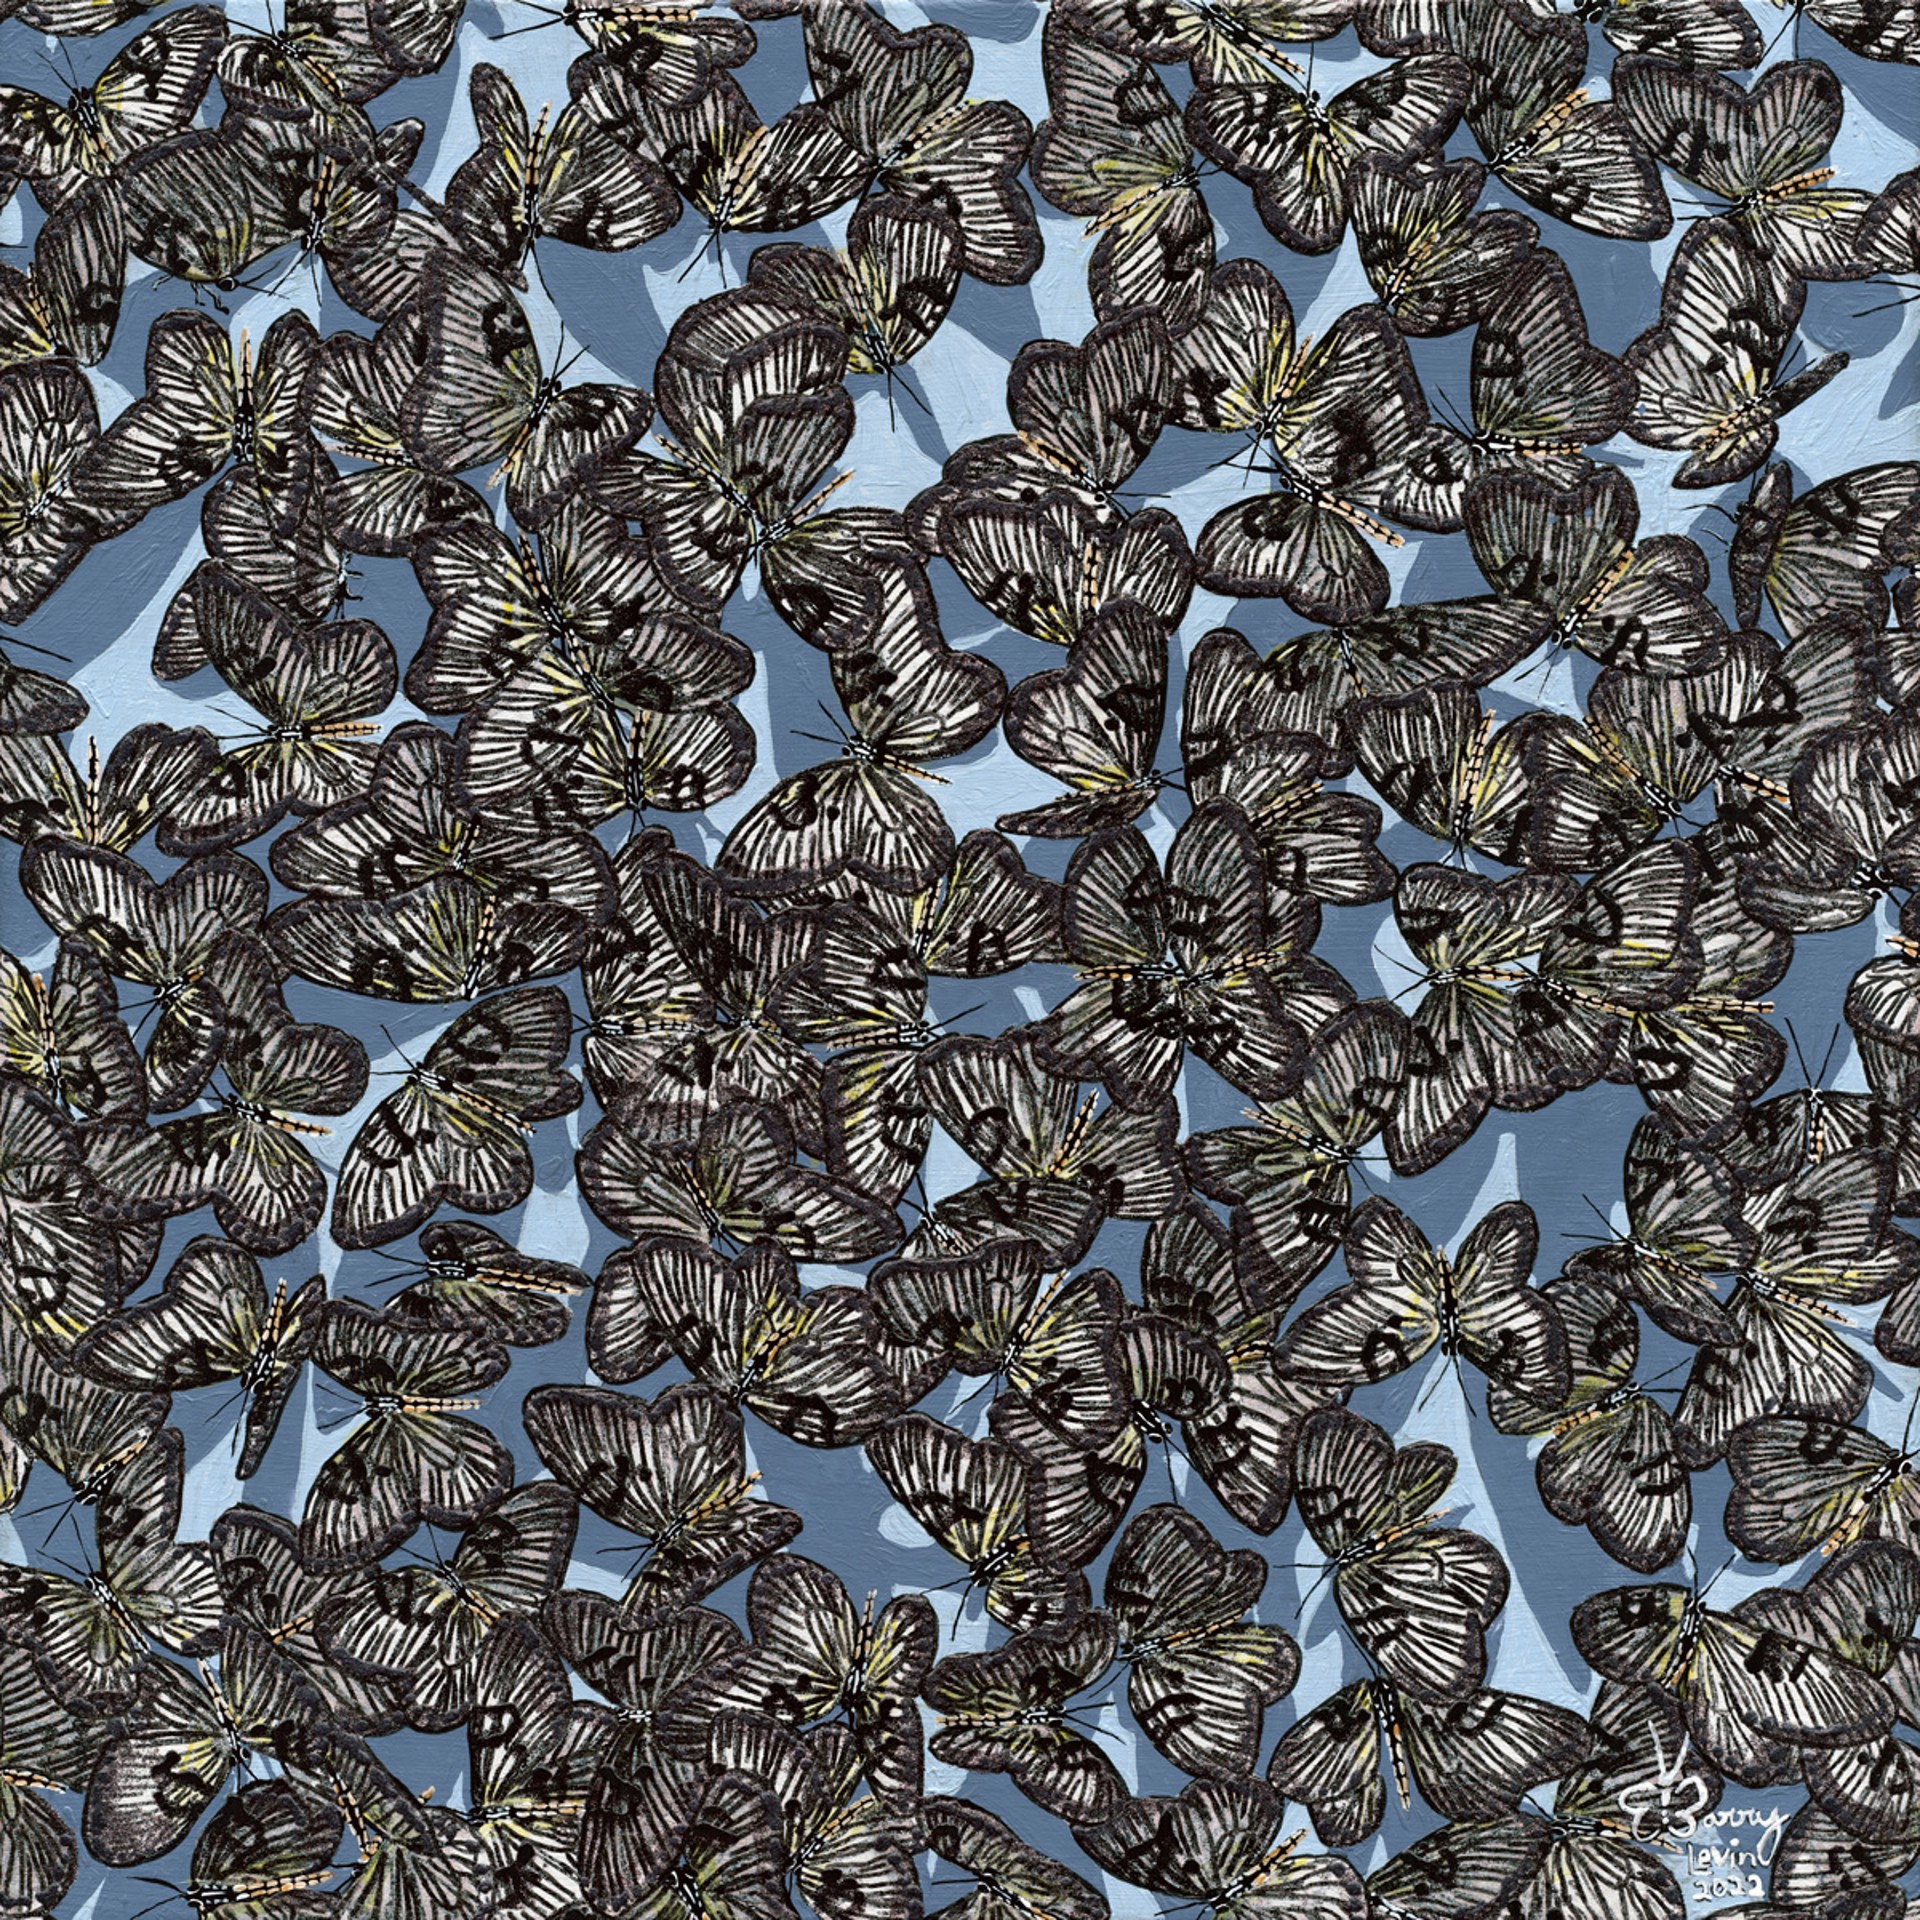 Rice Paper Swarm by Barry Levin